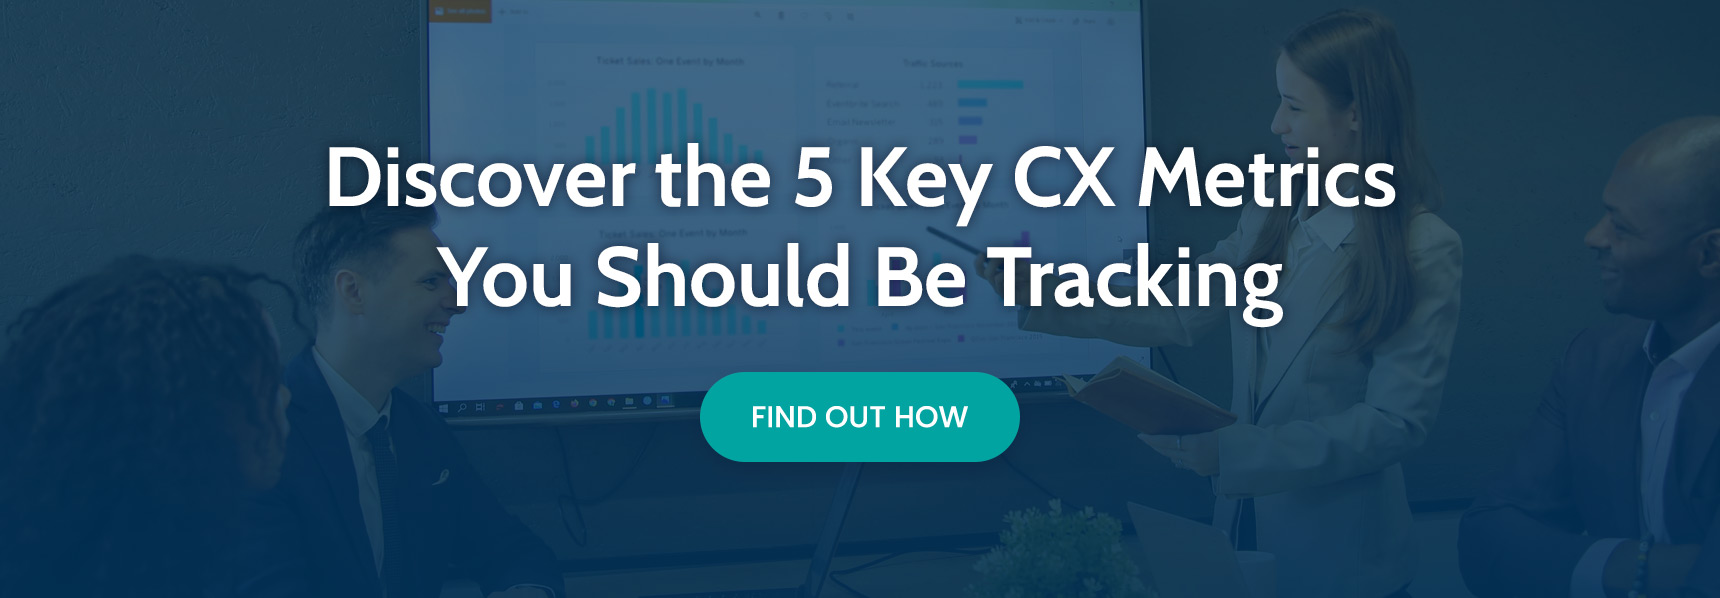 discover the 5 key cx metrics you should be tracking. click here to find out how